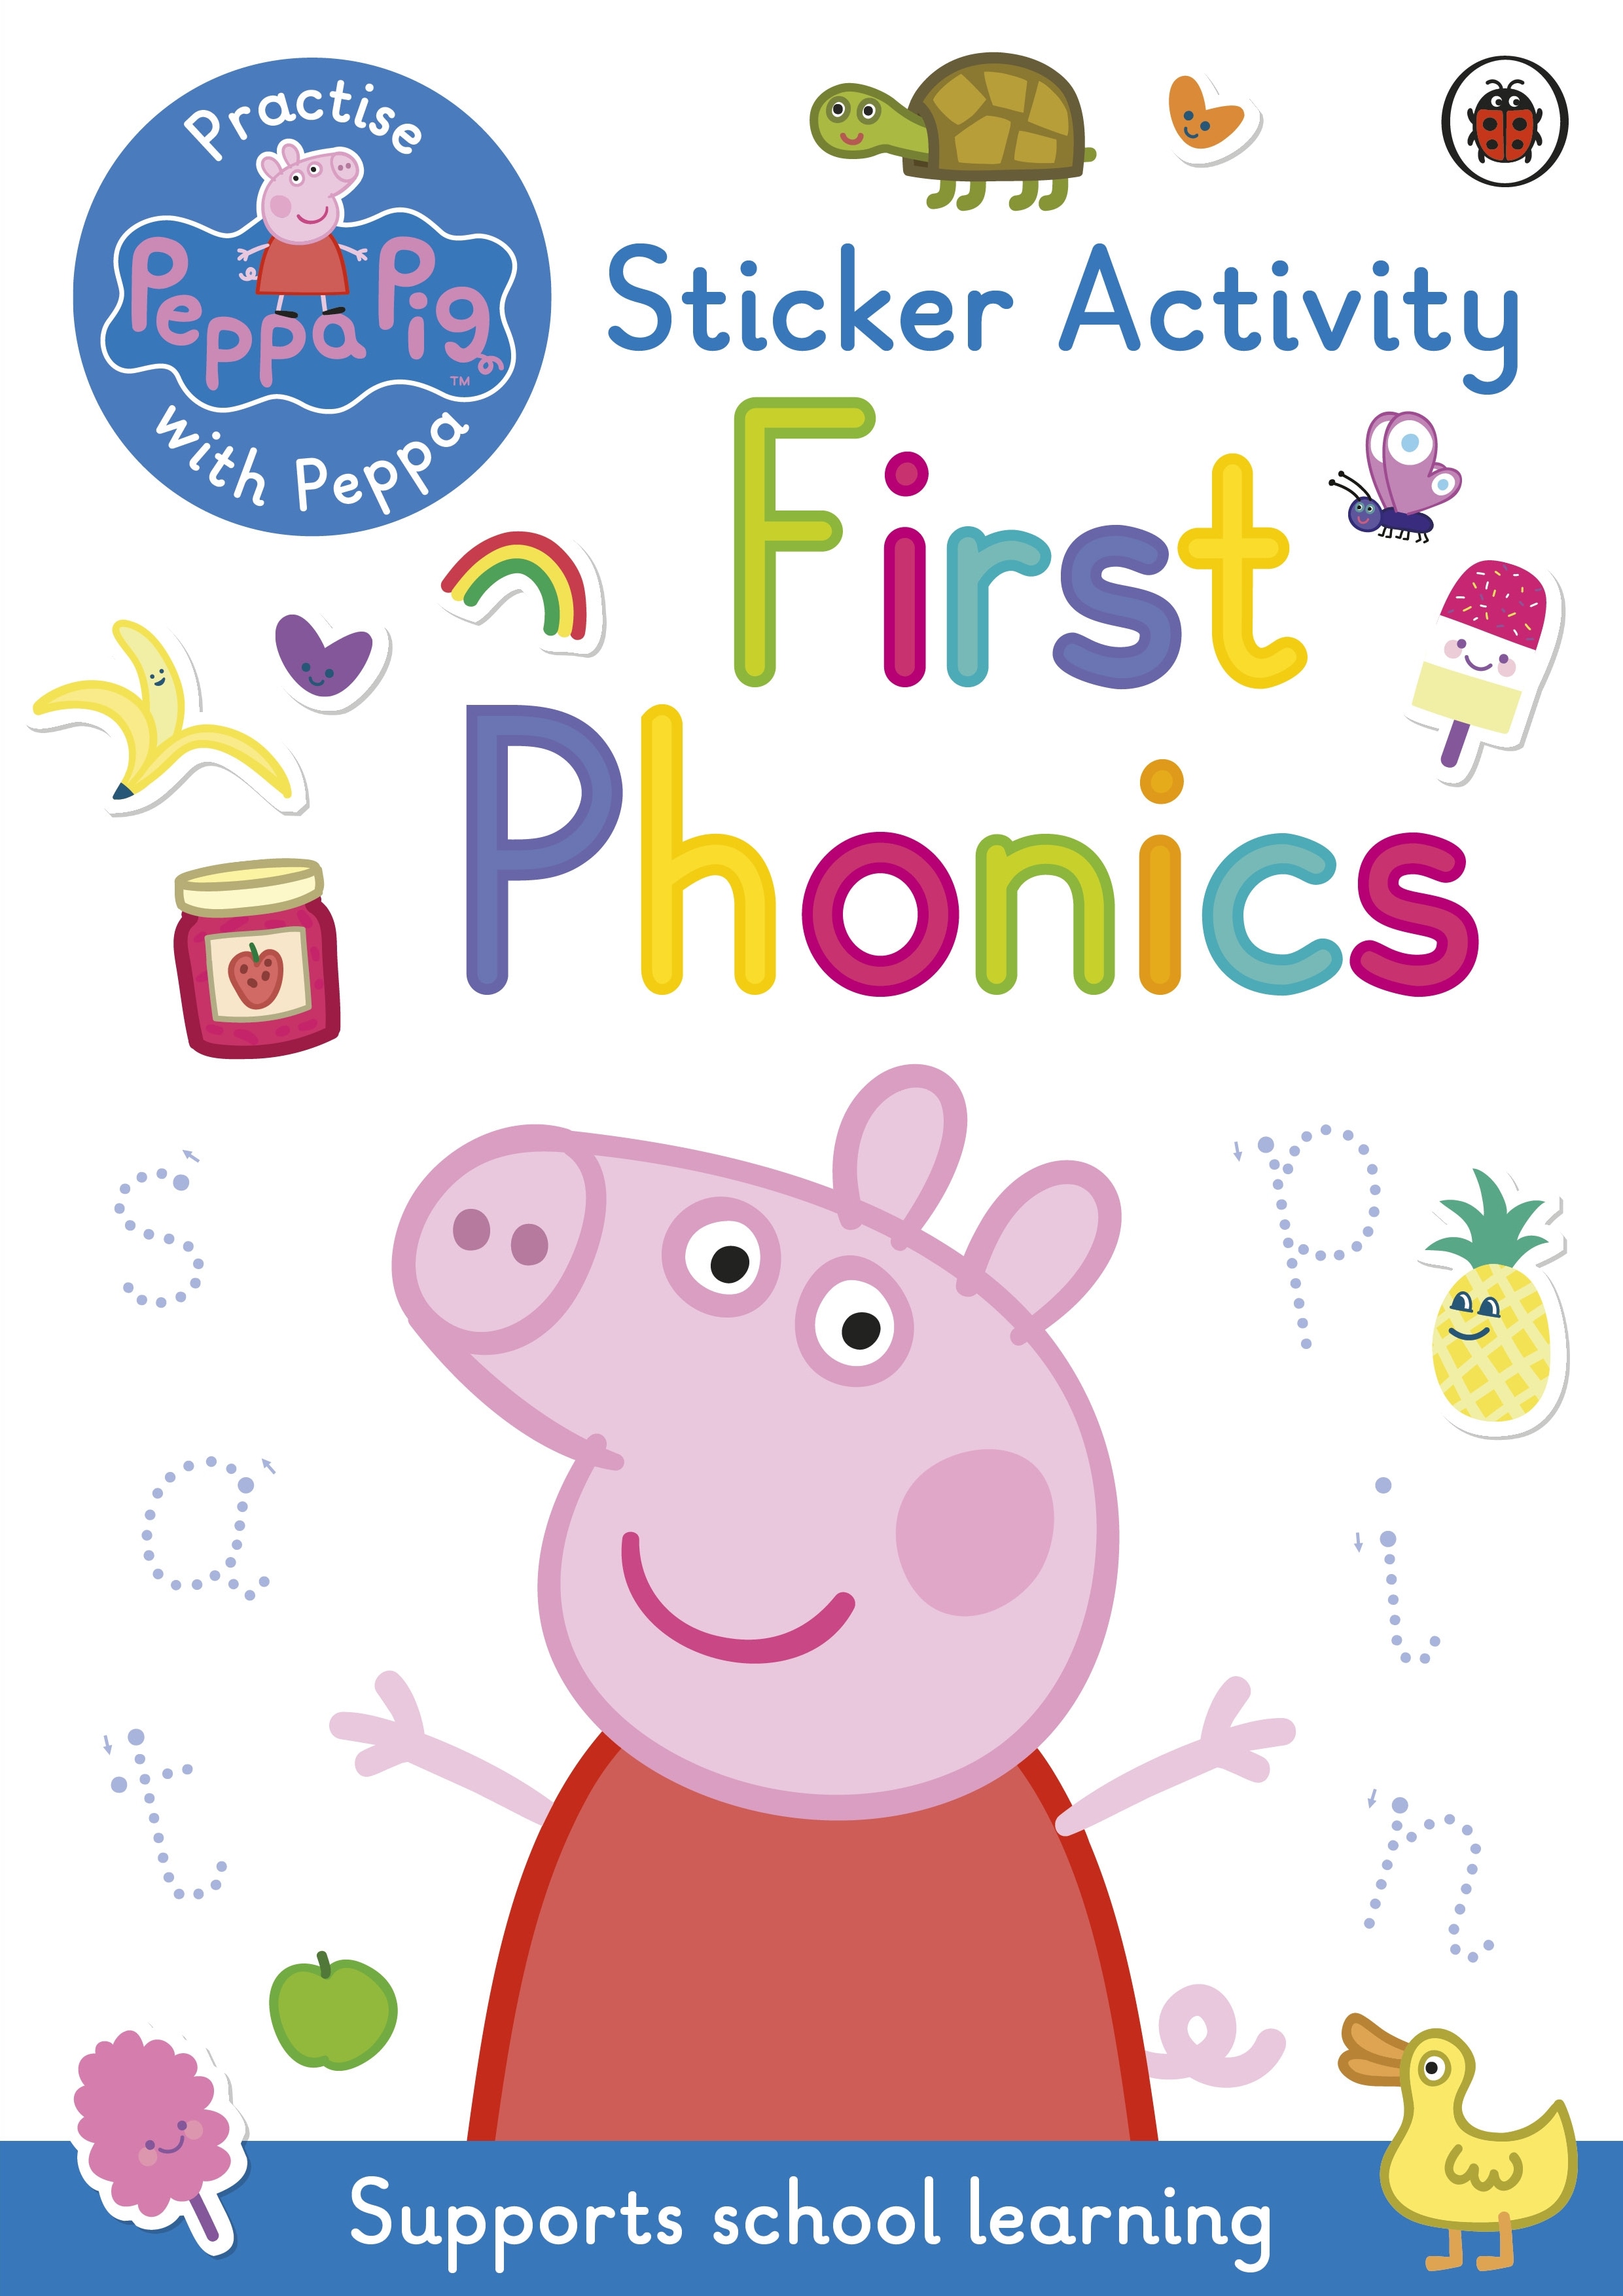 Book “Peppa Pig: Practise with Peppa: First Phonics” by Peppa Pig — September 17, 2020